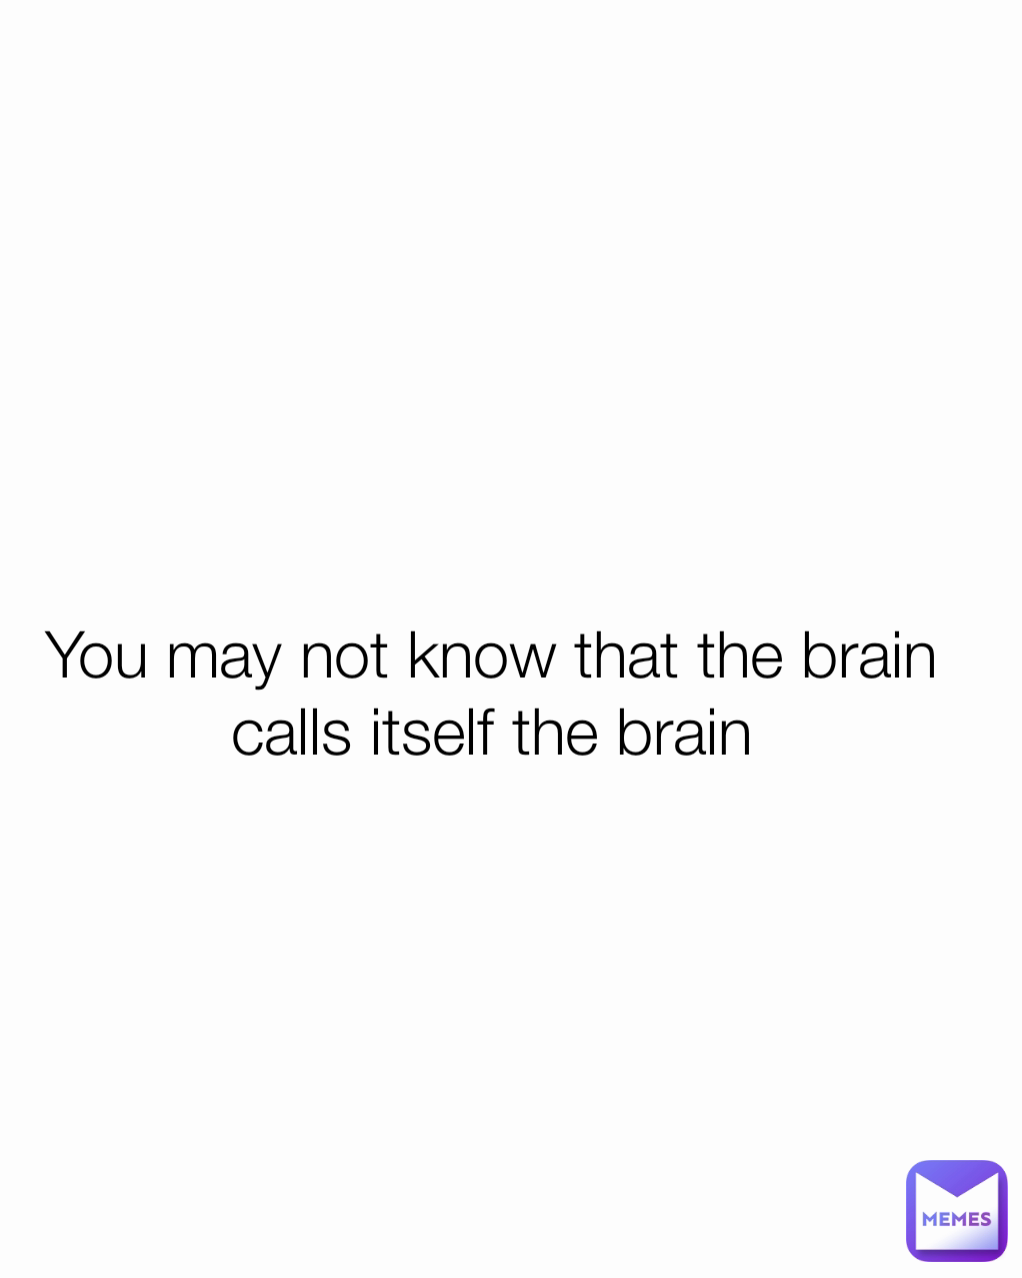 You may not know that the brain calls itself the brain